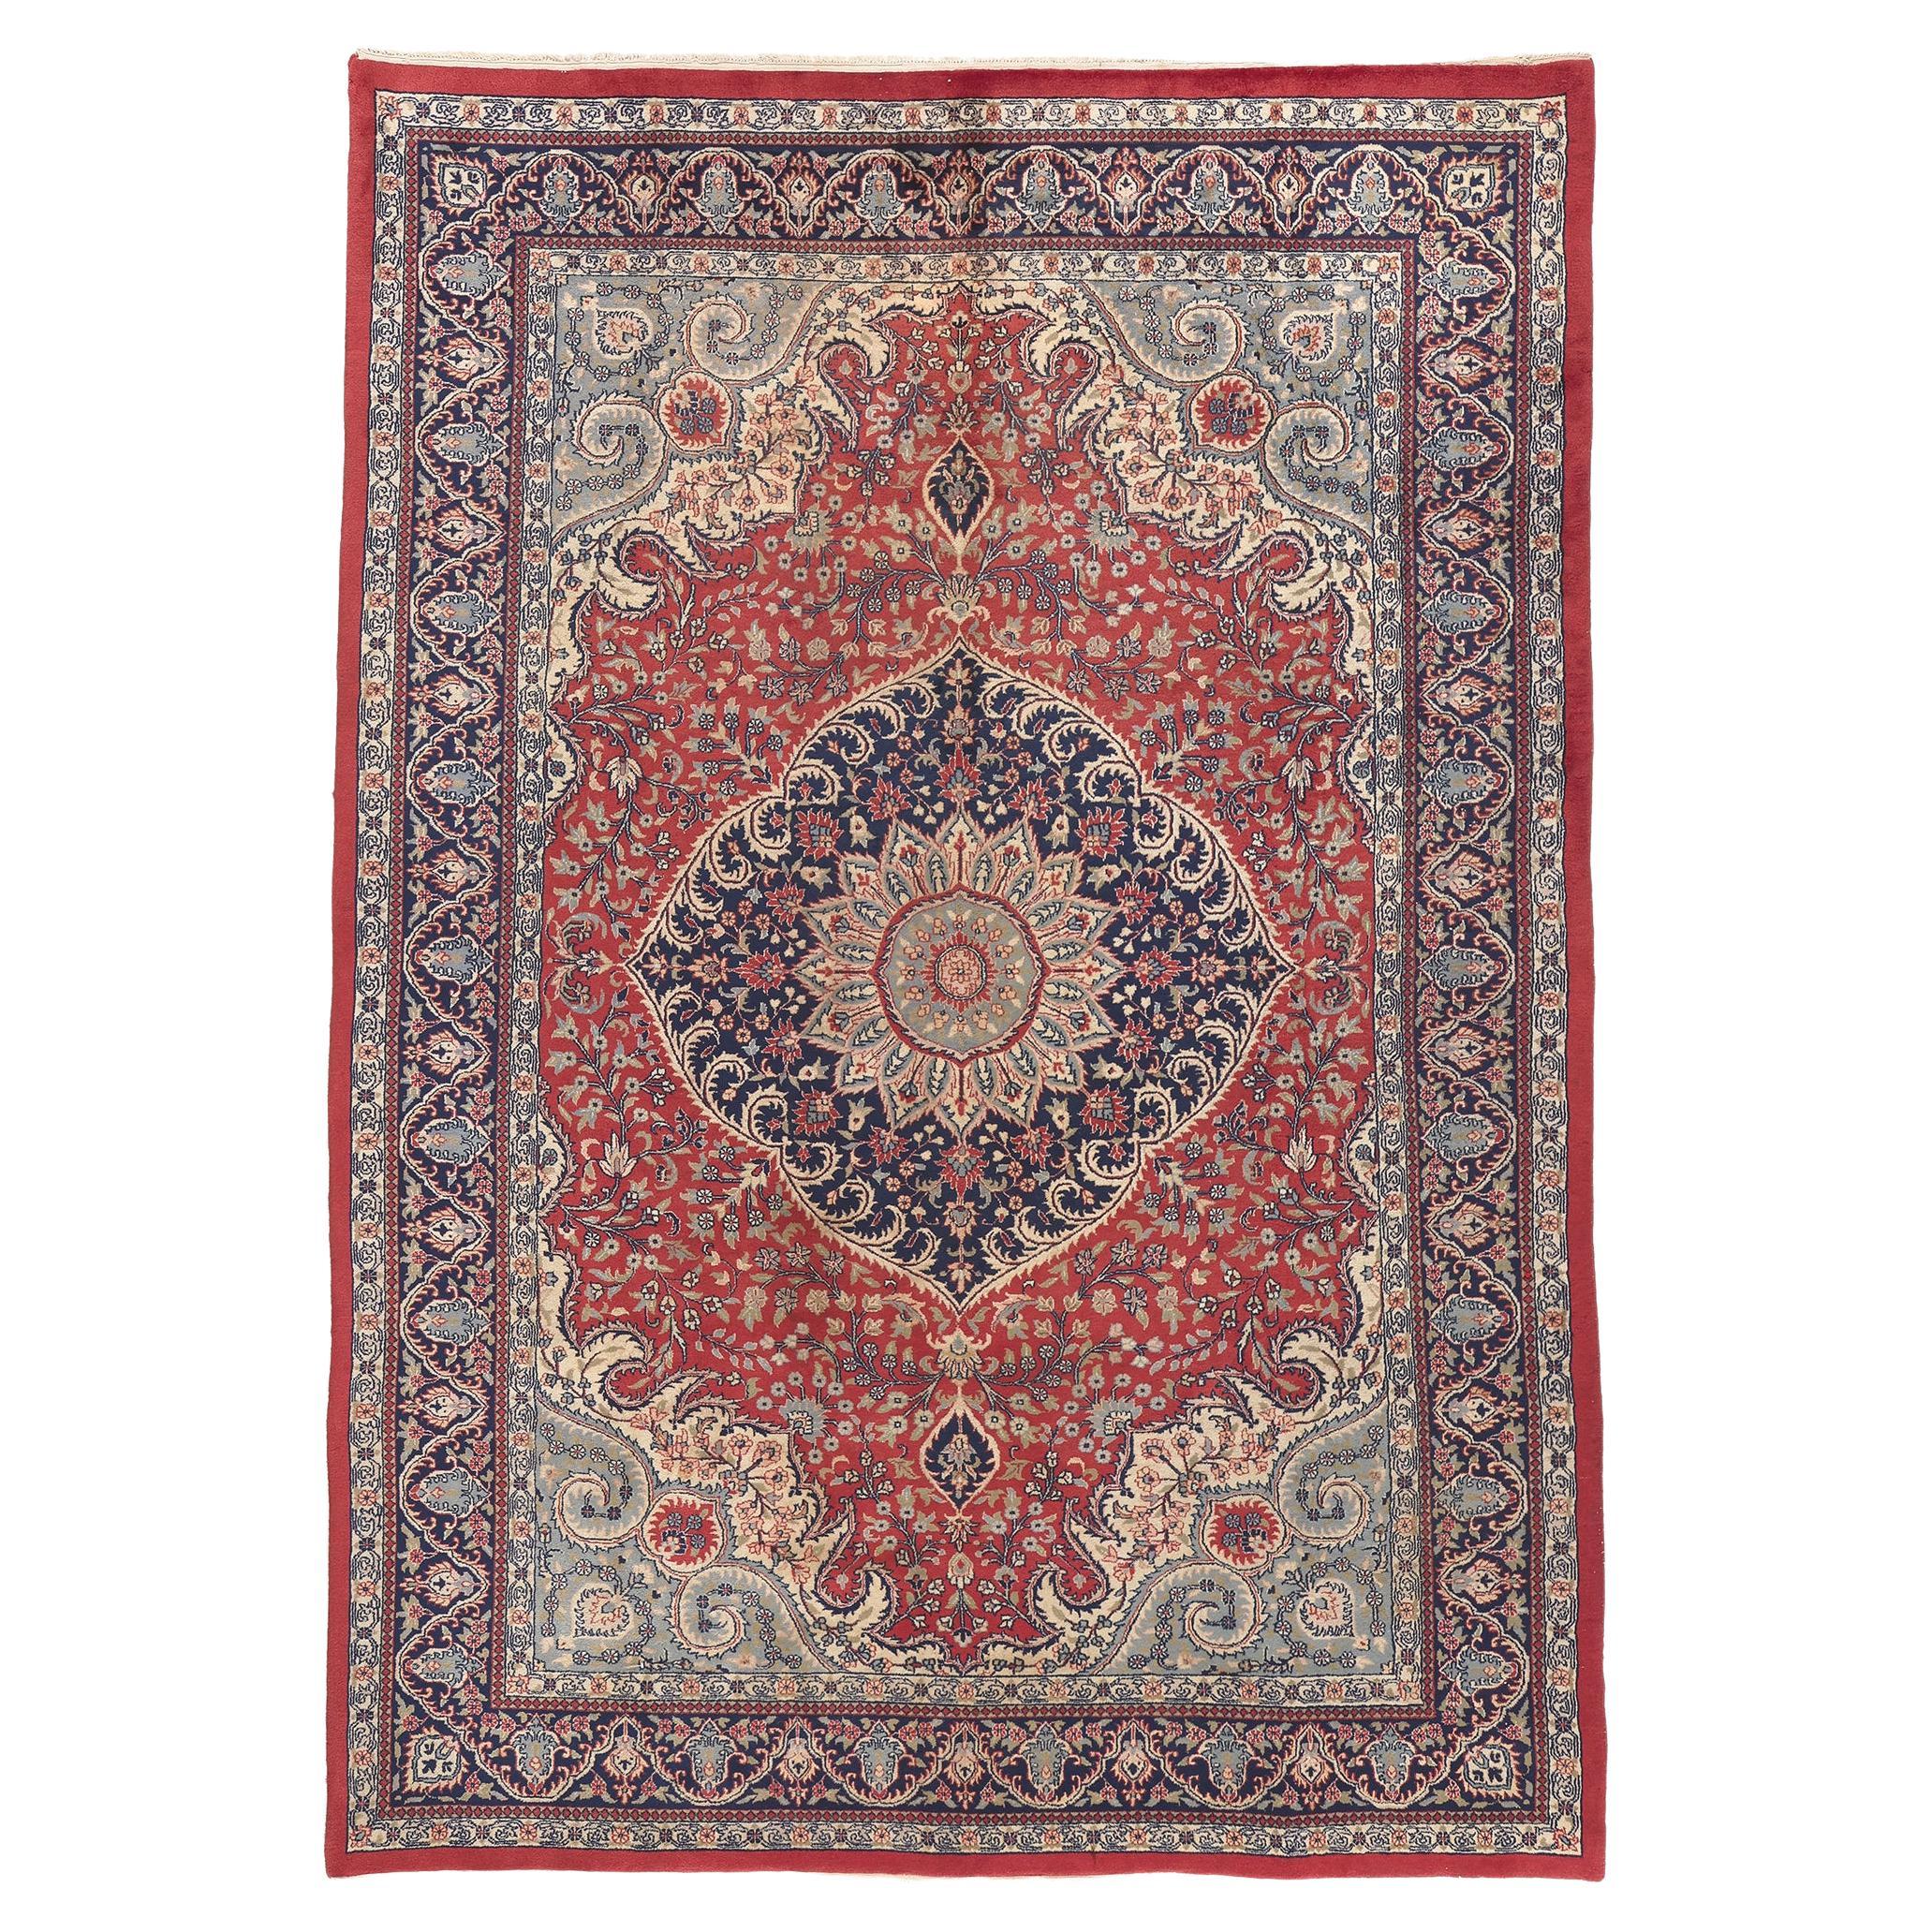 Vintage Indian Tabriz Rug, Stately Decadence Meets Preppy Formality For Sale